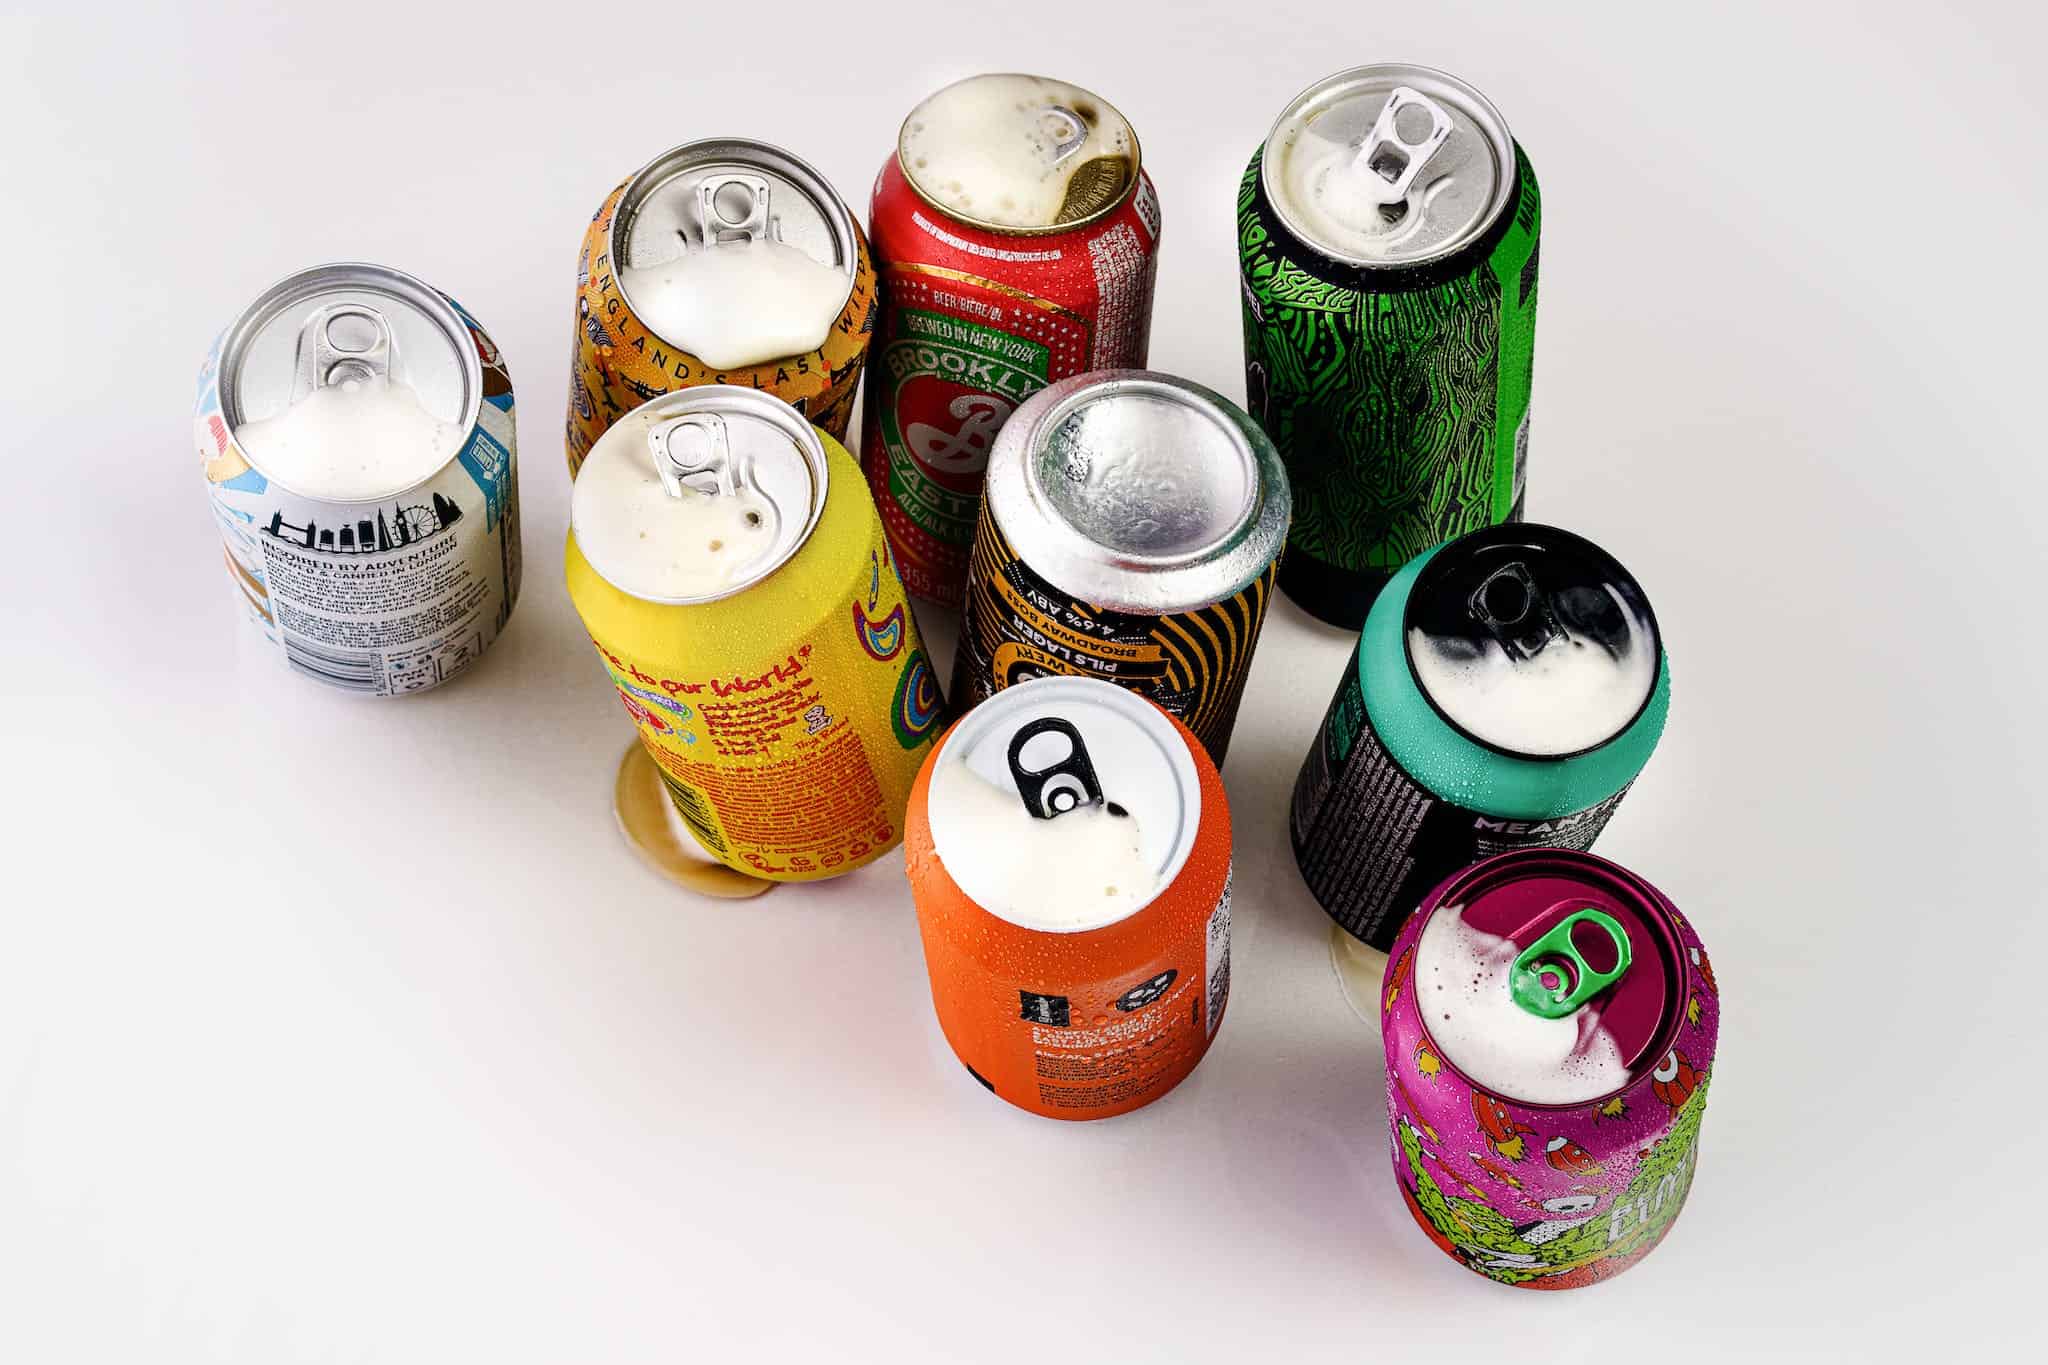 Sweetened beverages: Rethink your Drink and Improve Health